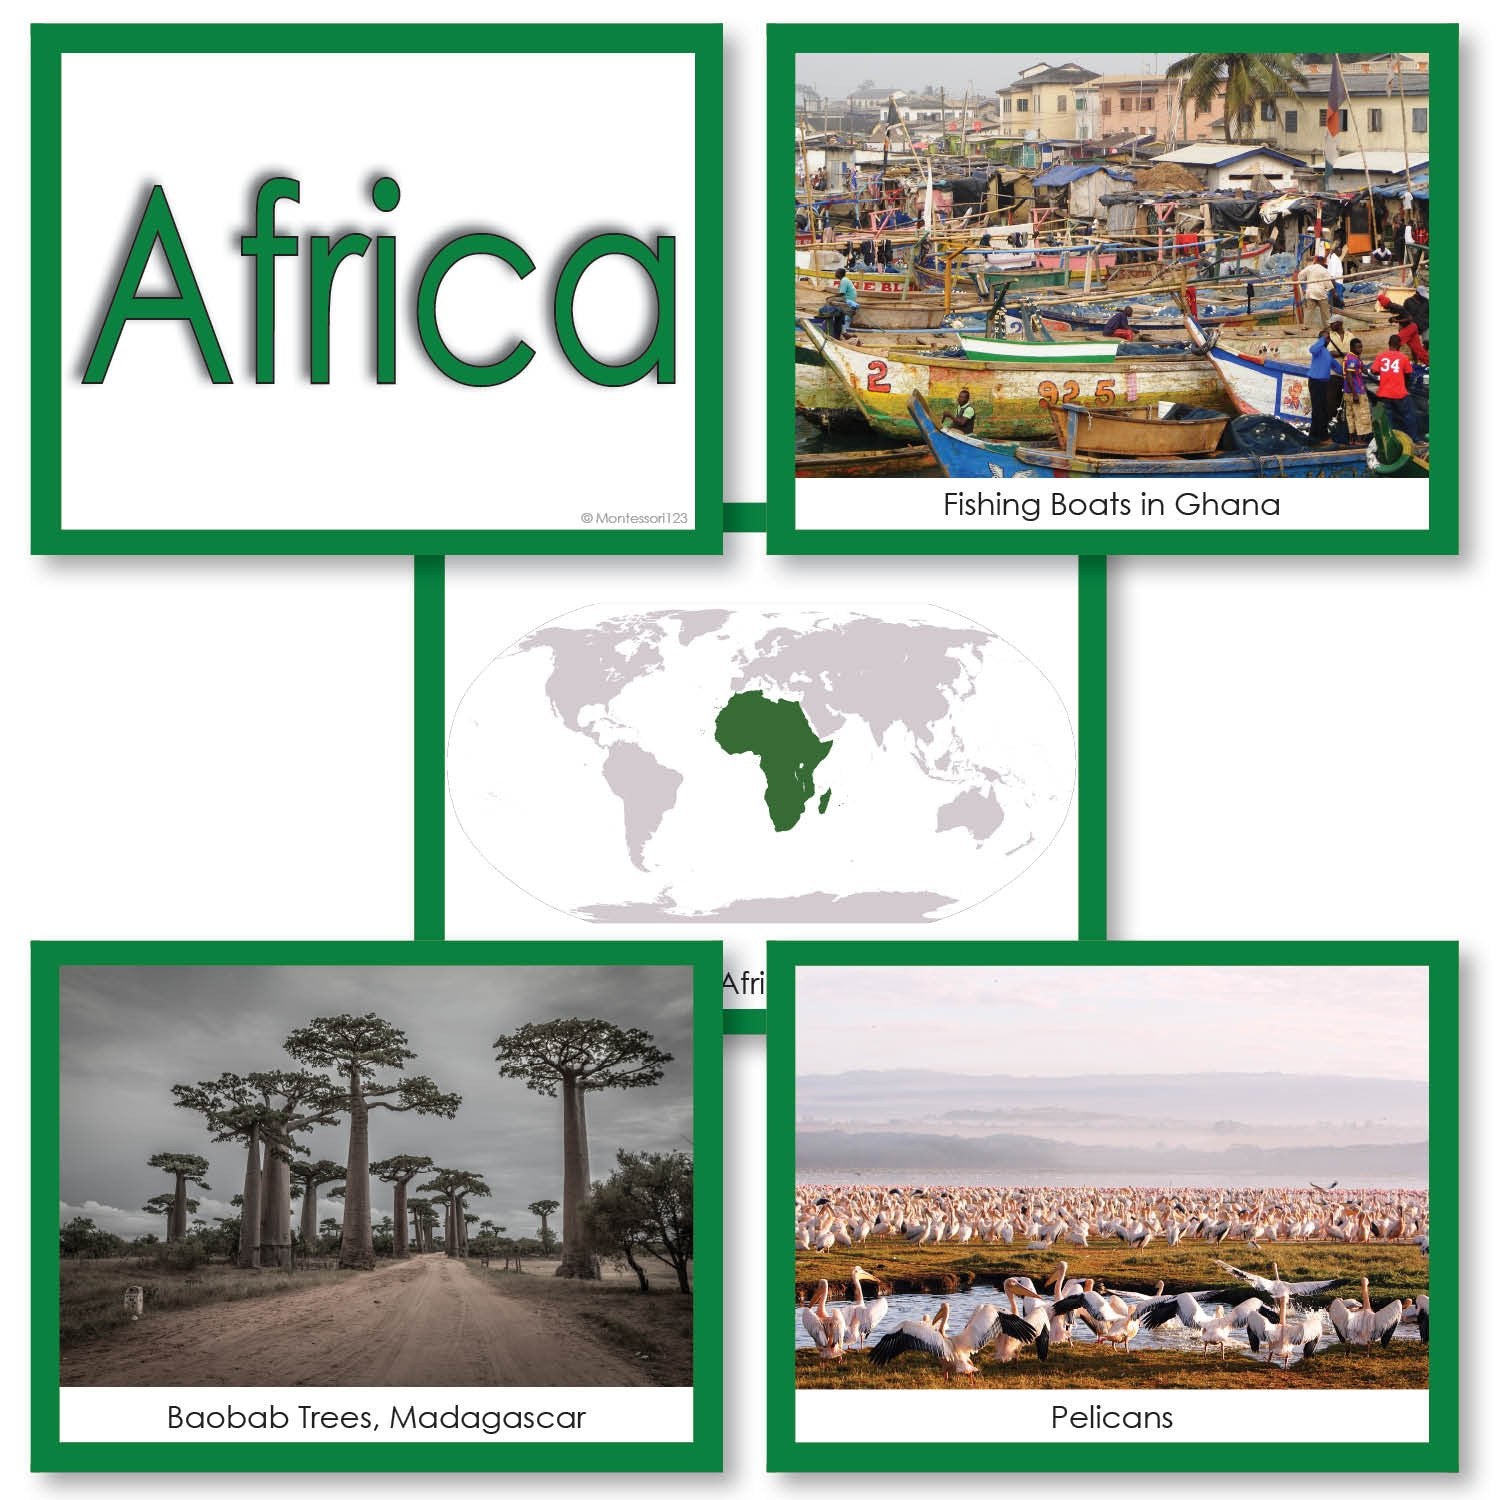 Geography Material-Study Of World Geography - Image Folder Of The Continent Africa